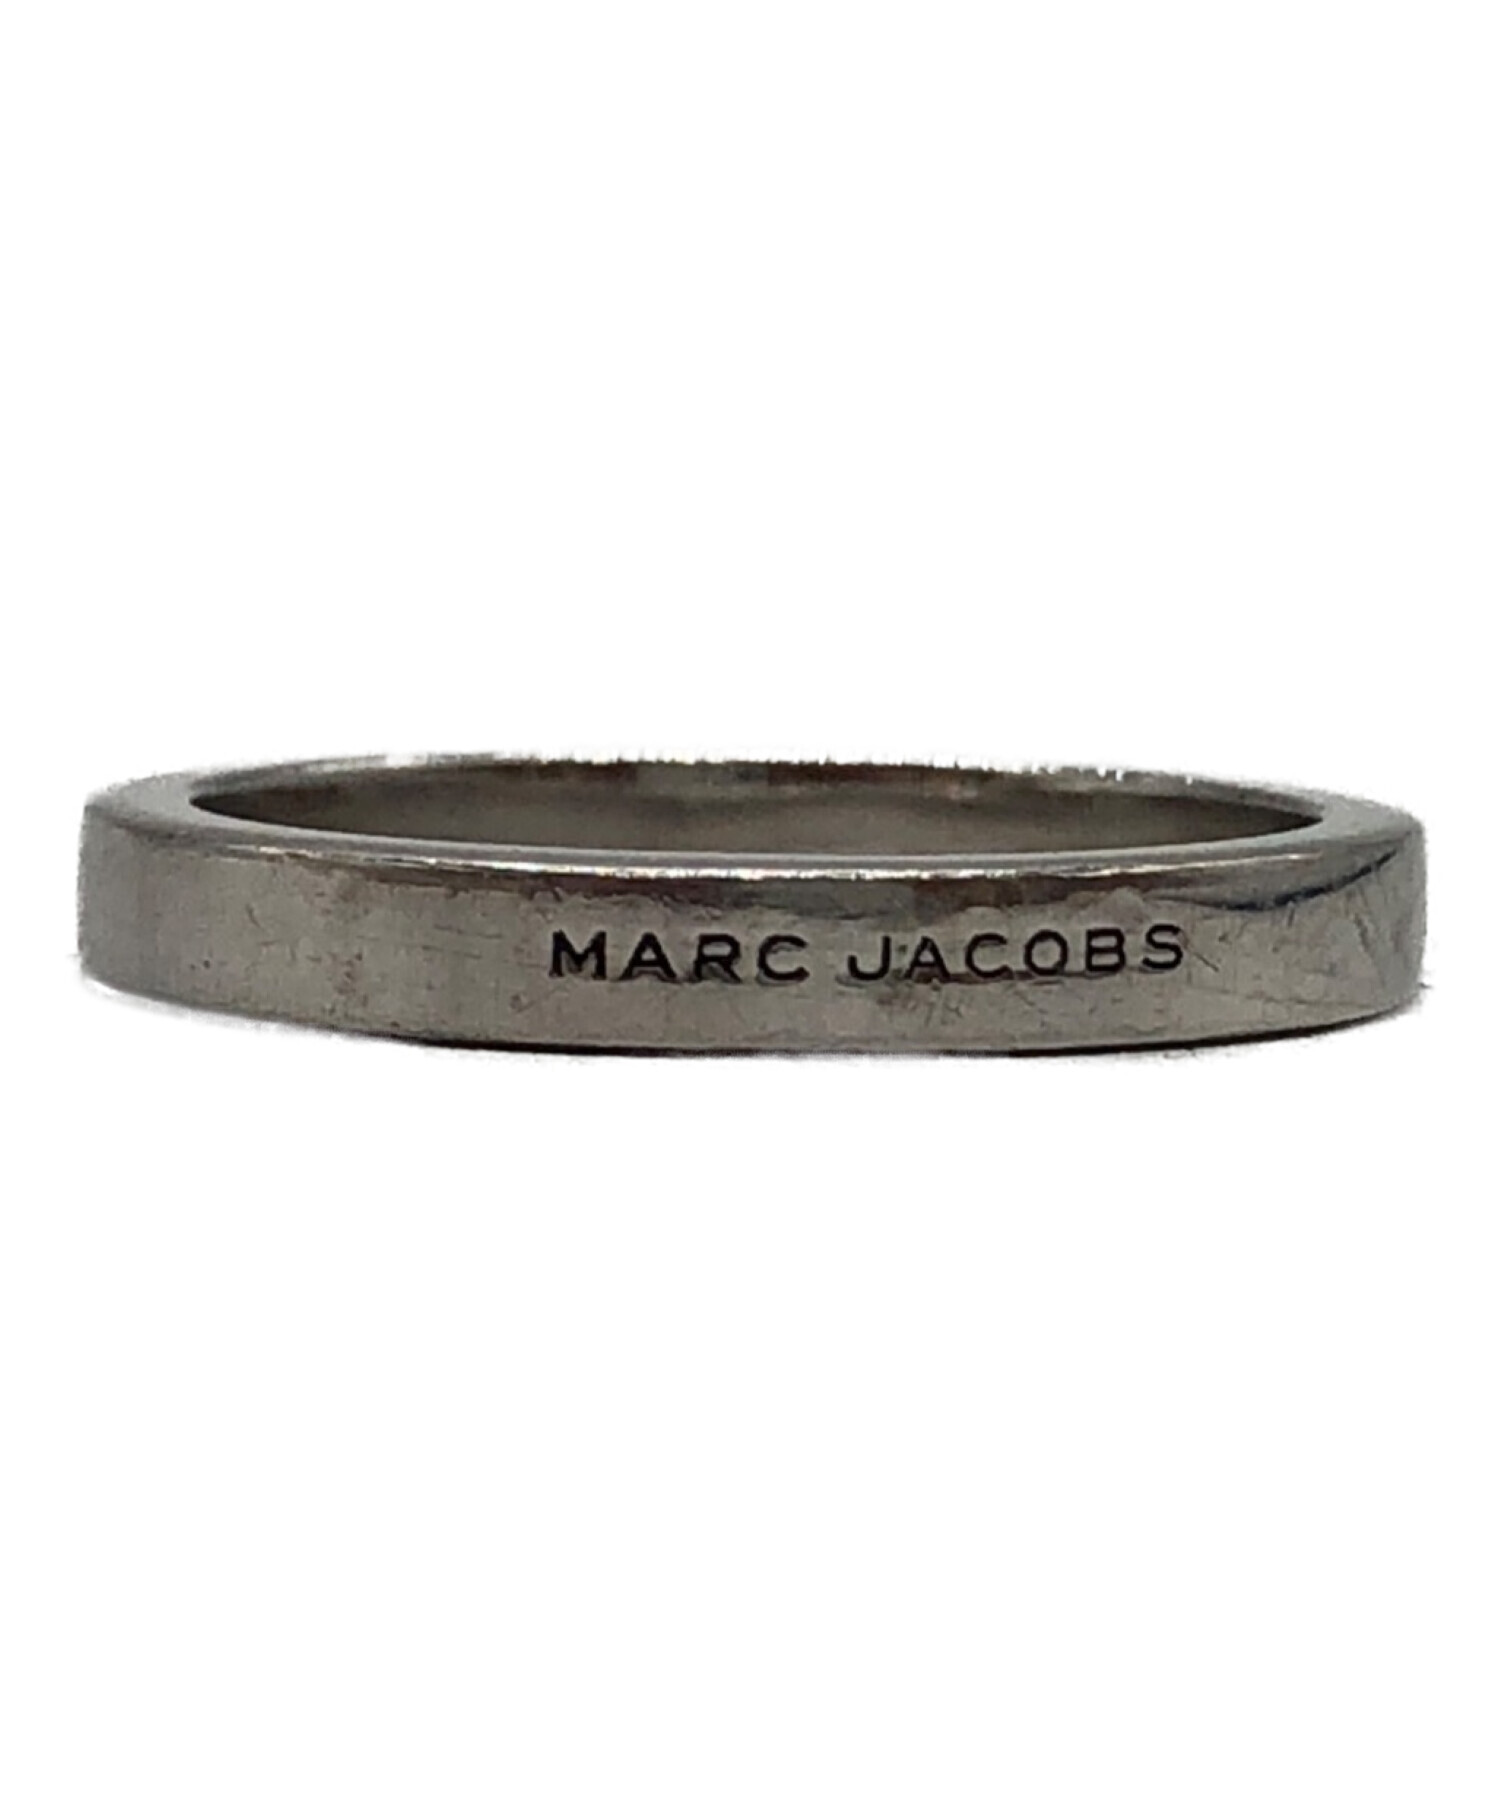 MARC JACOBS (マーク ジェイコブス) THE STACKED RINGS サイズ:14号